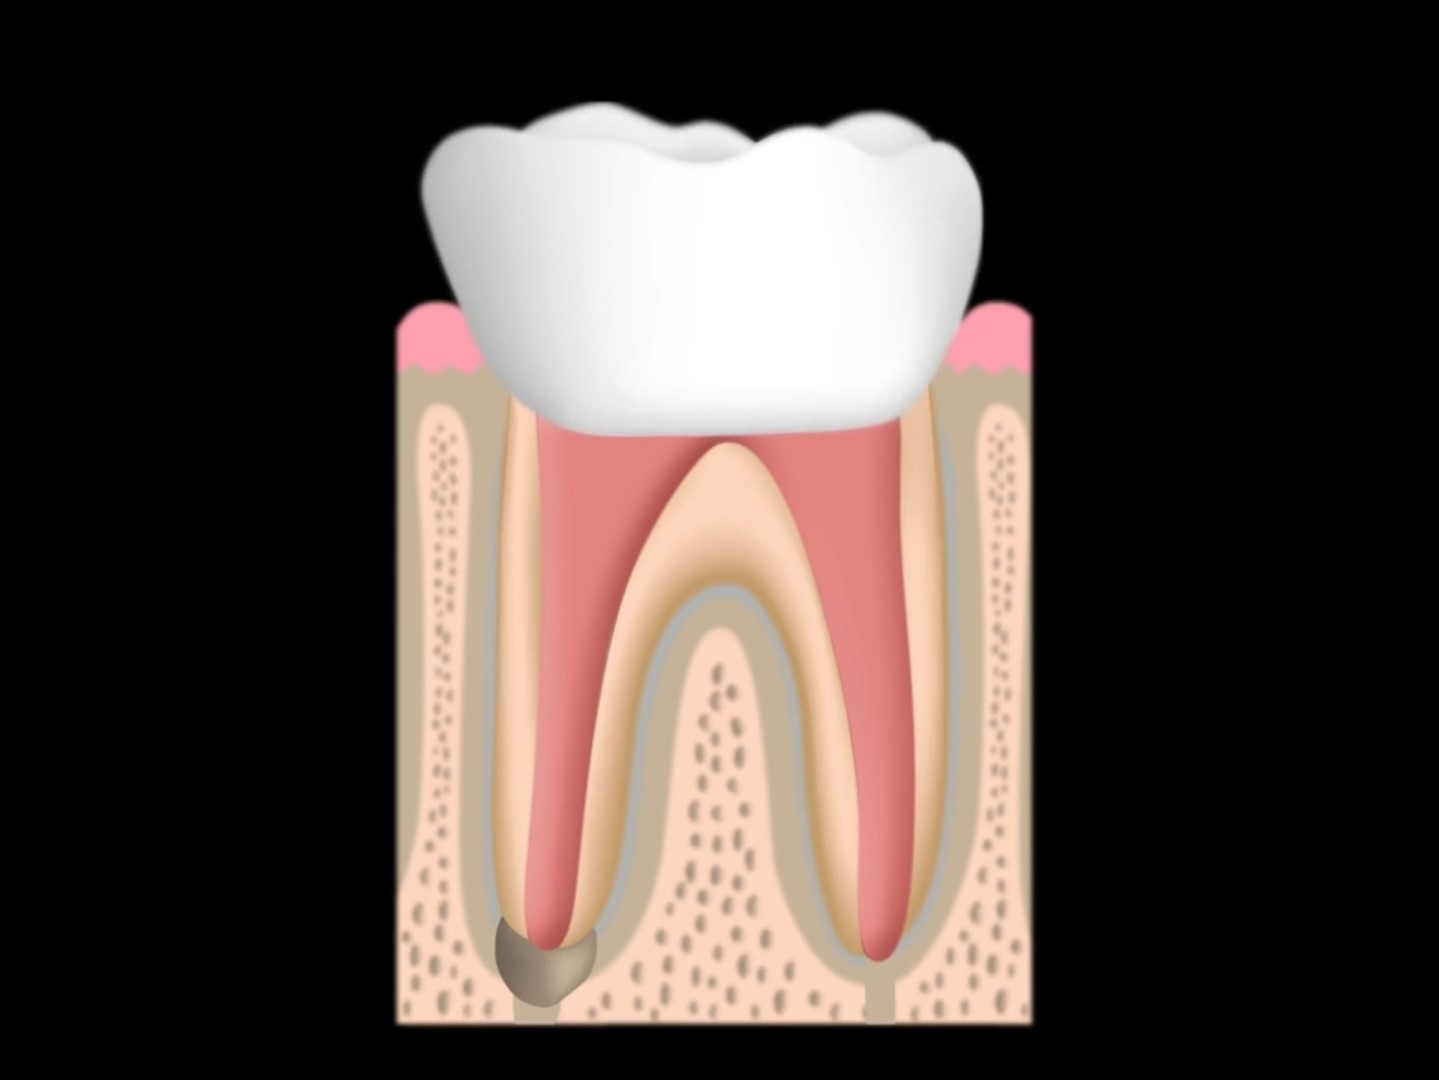 crown over root canal treatment dental crown